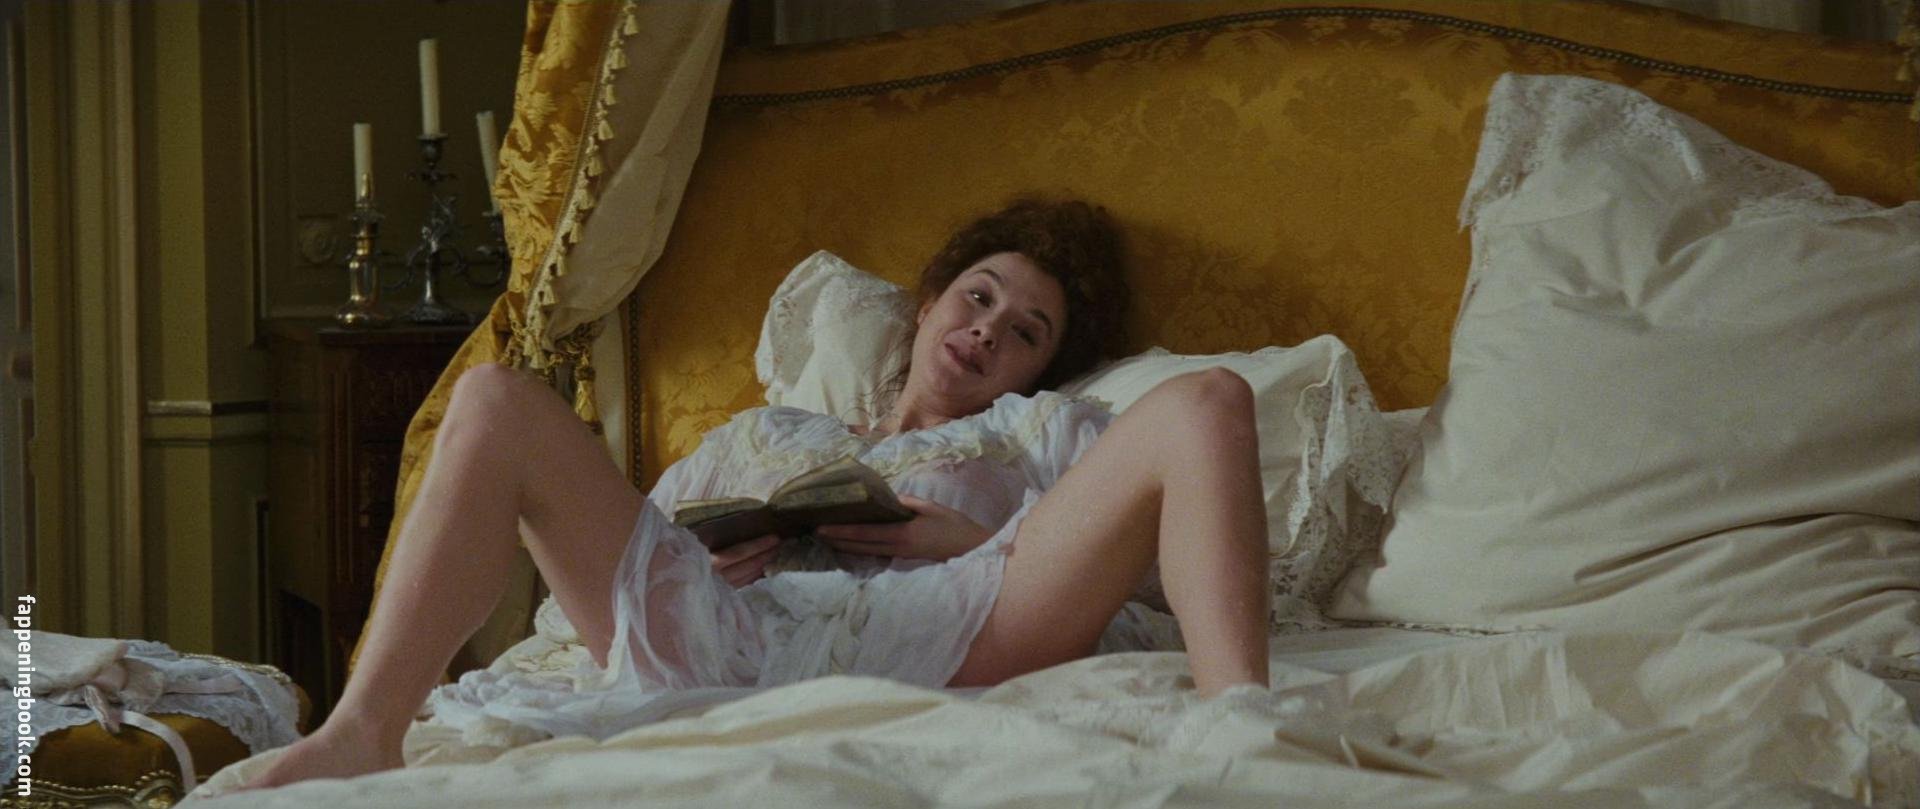 Annette Bening Nude, The Fappening - Photo #45077 - FappeningBook.